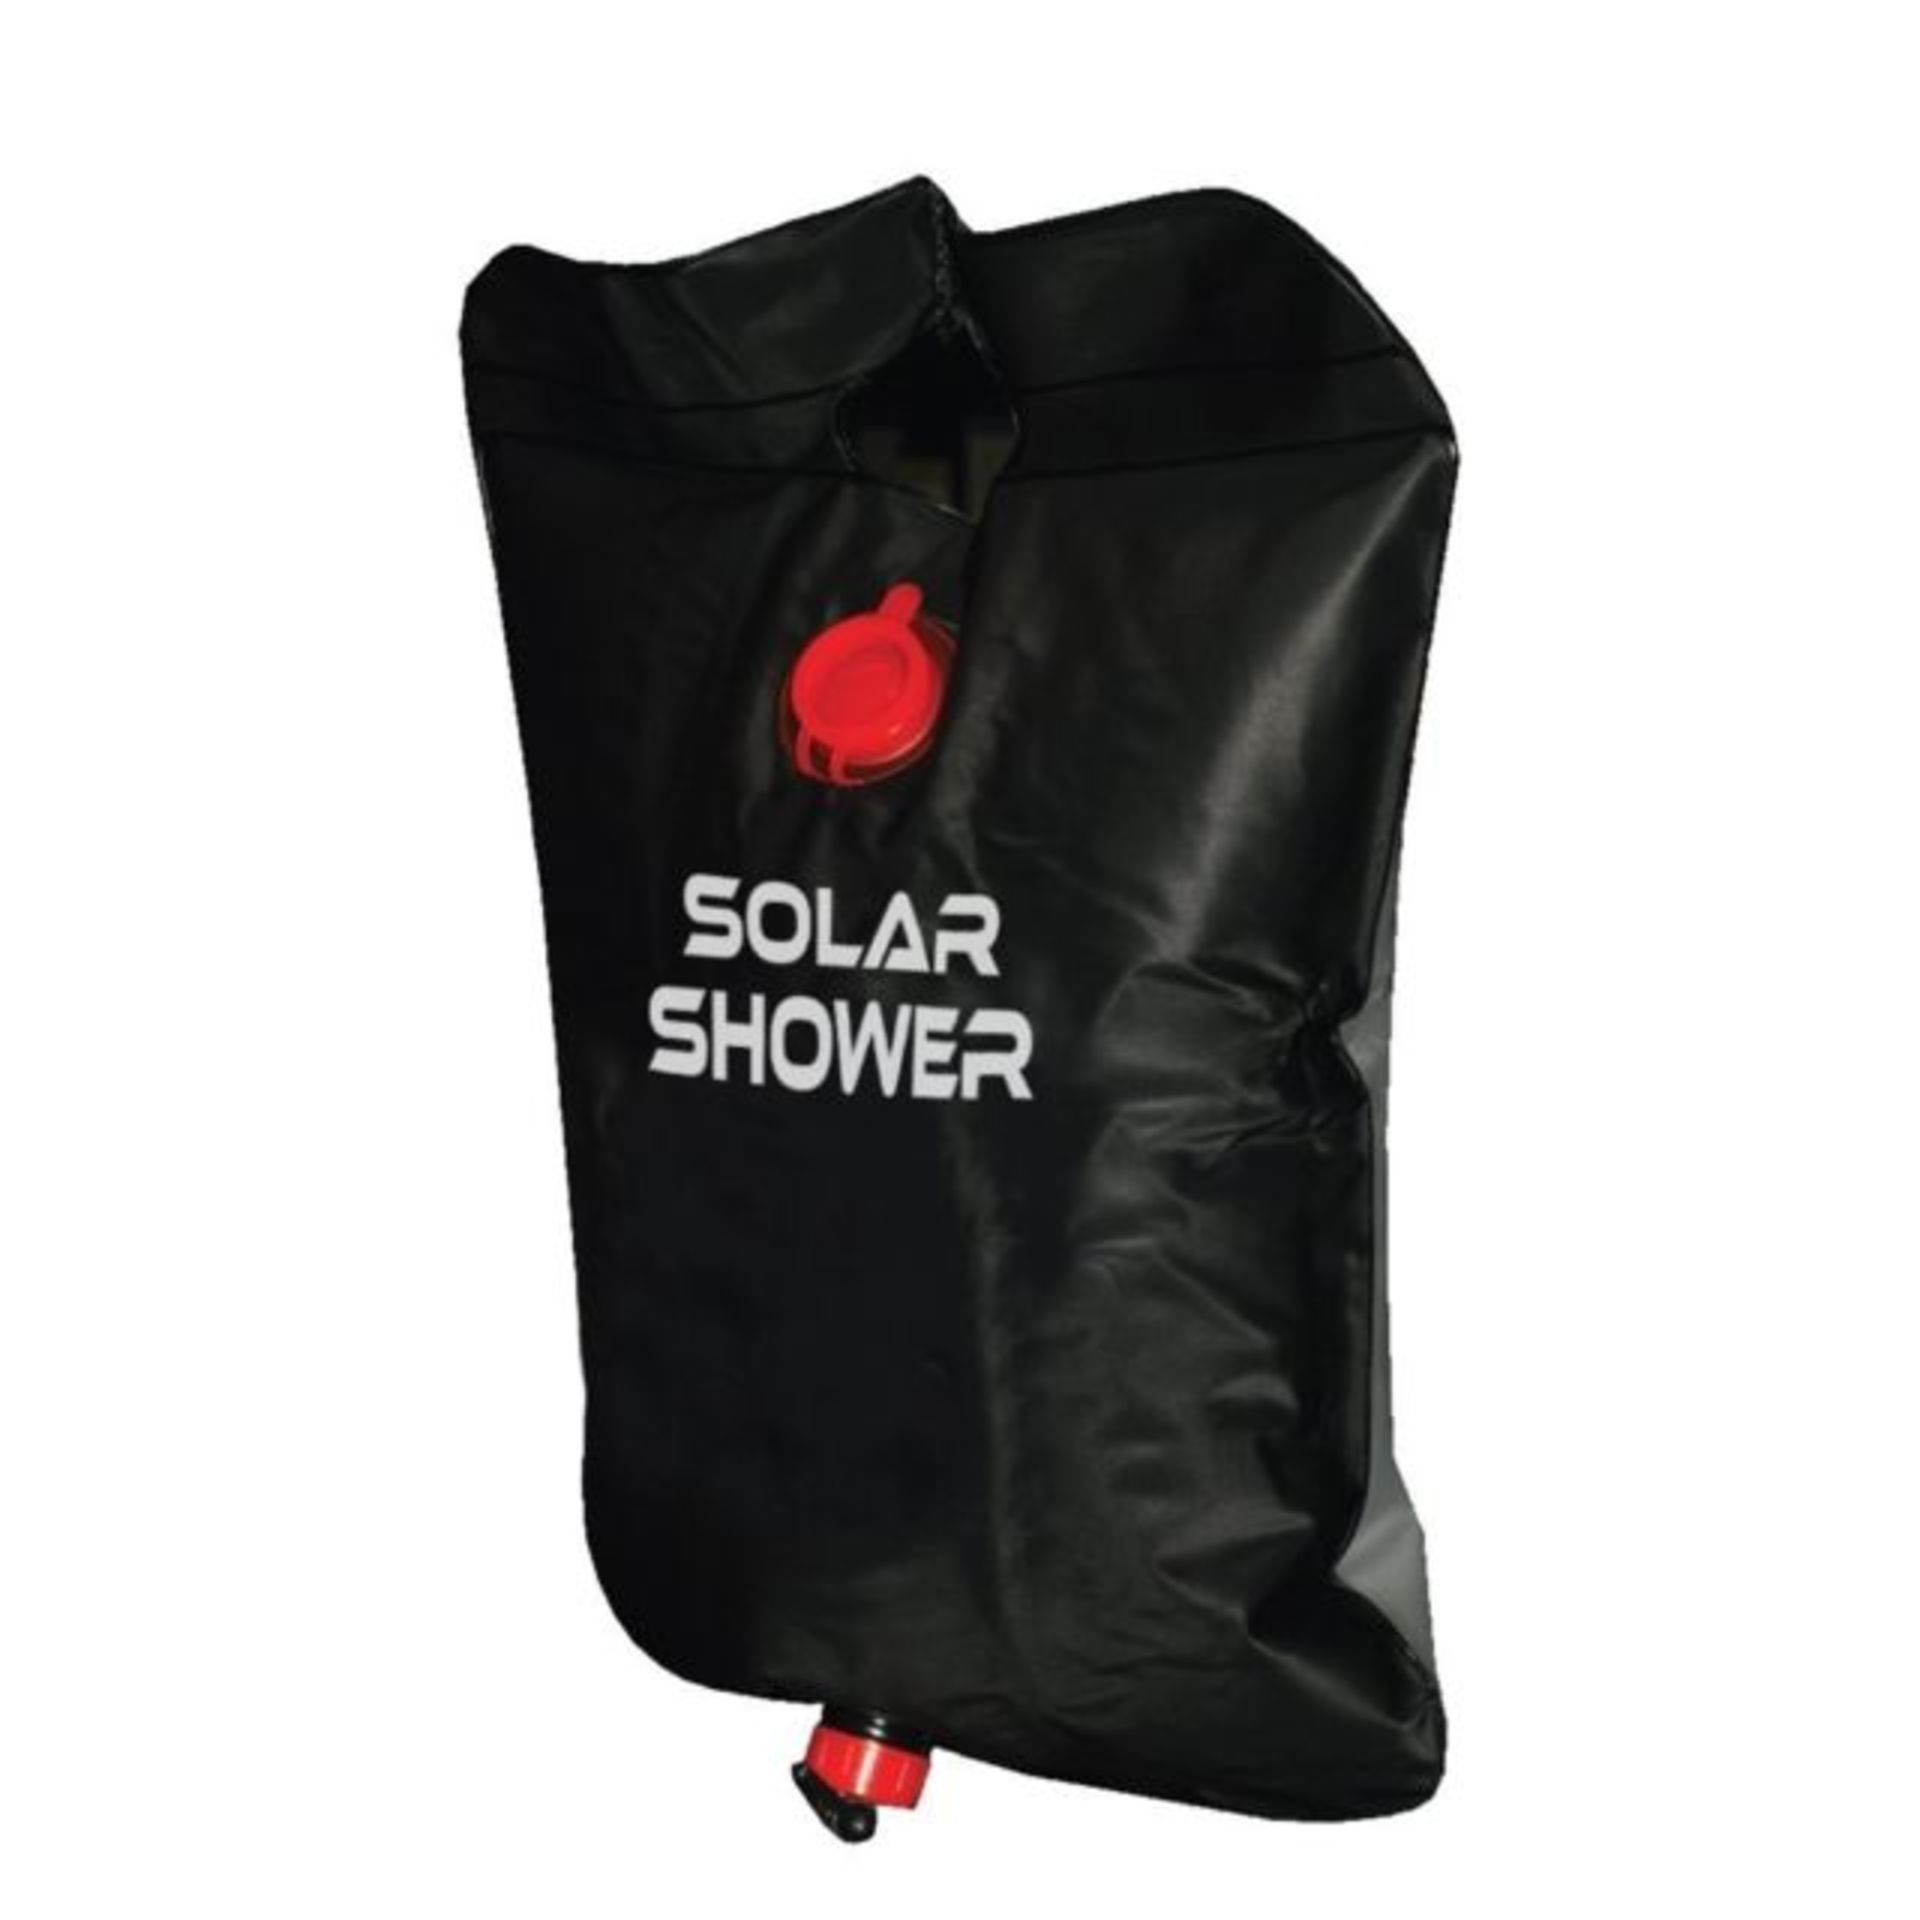 V *TRADE QTY* Brand New 20 Litre Solar Heated Shower Includes Shower Head & Tubing X 10 YOUR BID